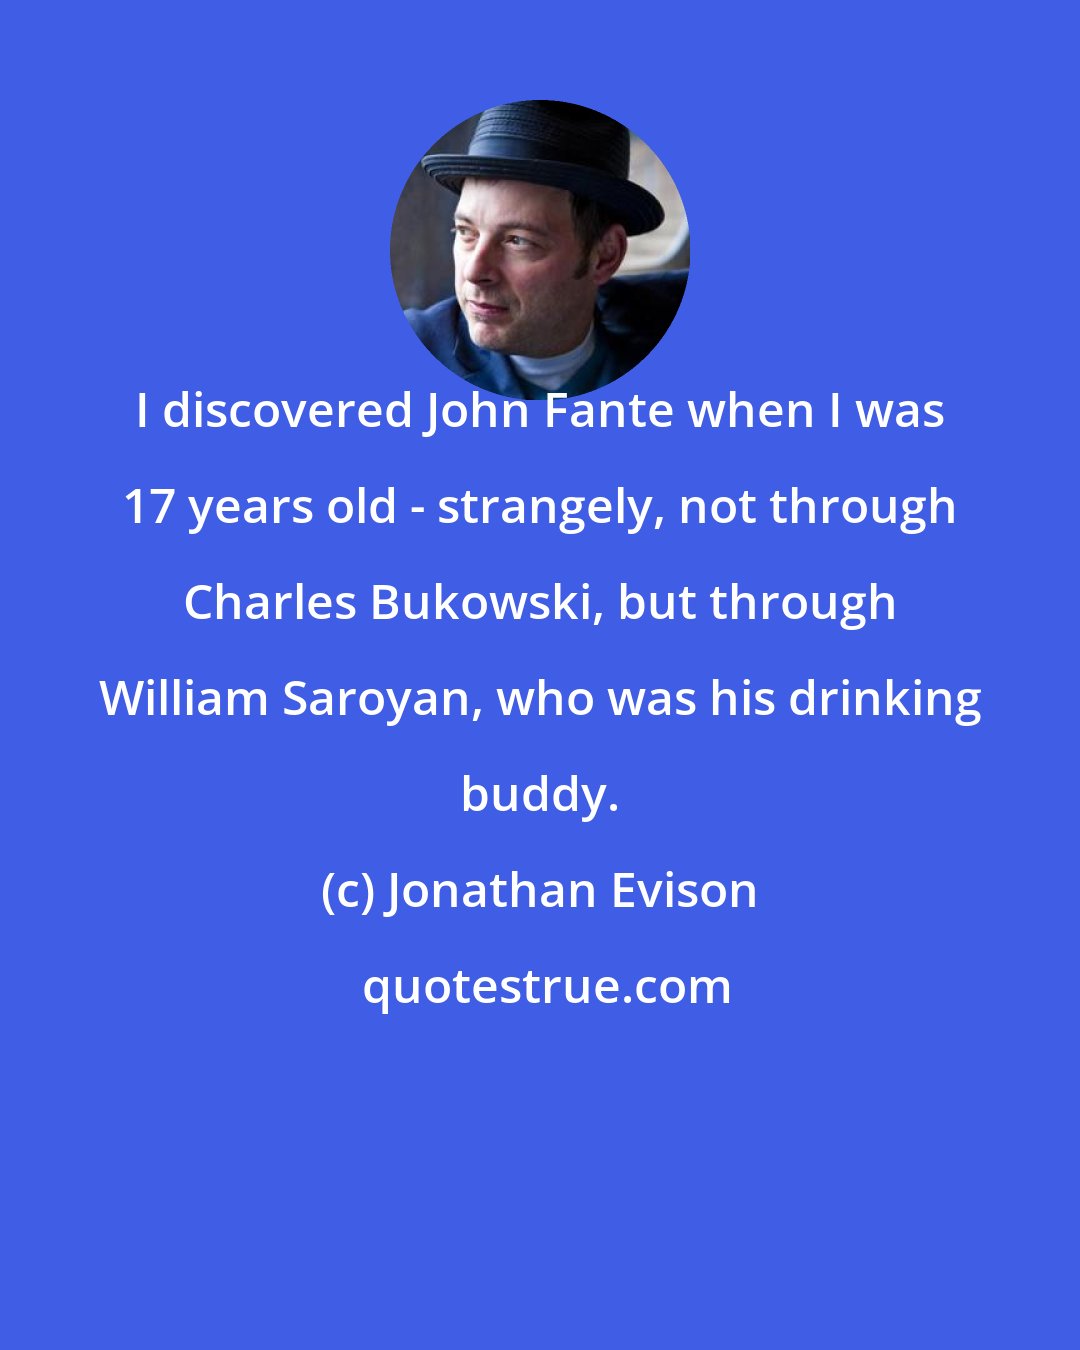 Jonathan Evison: I discovered John Fante when I was 17 years old - strangely, not through Charles Bukowski, but through William Saroyan, who was his drinking buddy.